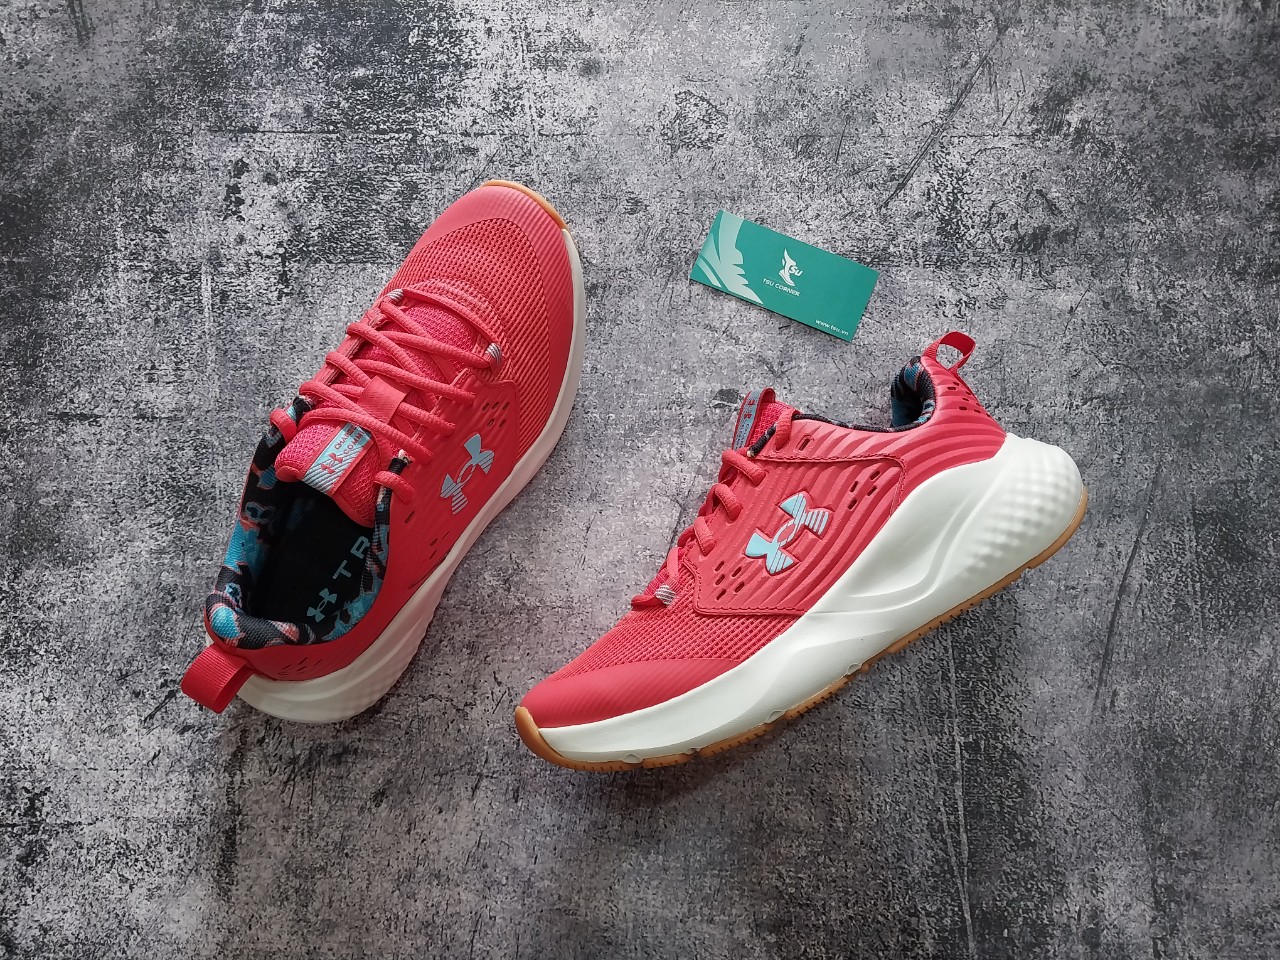 Giày thể thao Under Armour nữ - Red